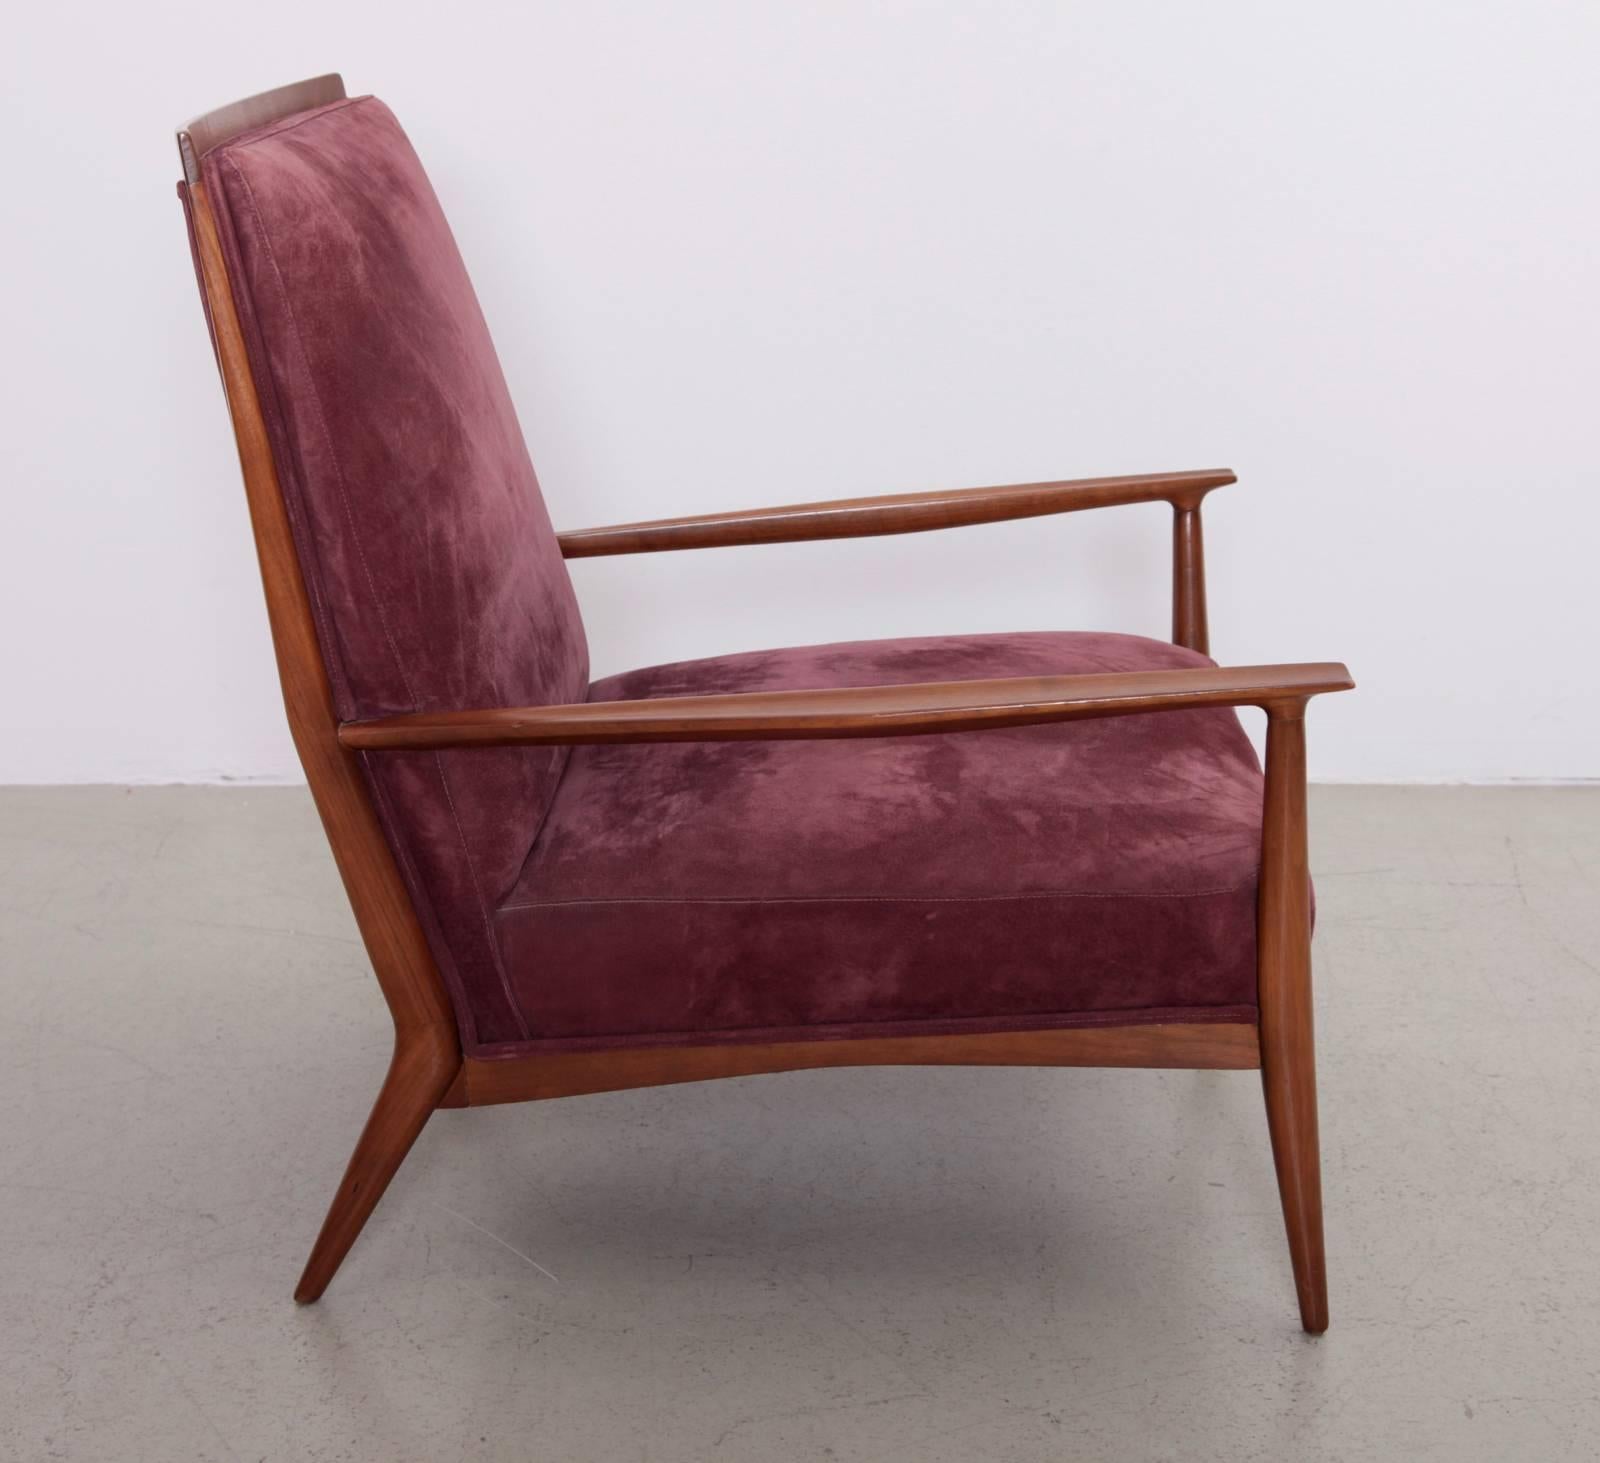 Same chair as on the cover of the famous McCobb Directional Book. Frame is walnut and cover is in excellent condition nubuck leather in purple. Very cool combo with the walnut.